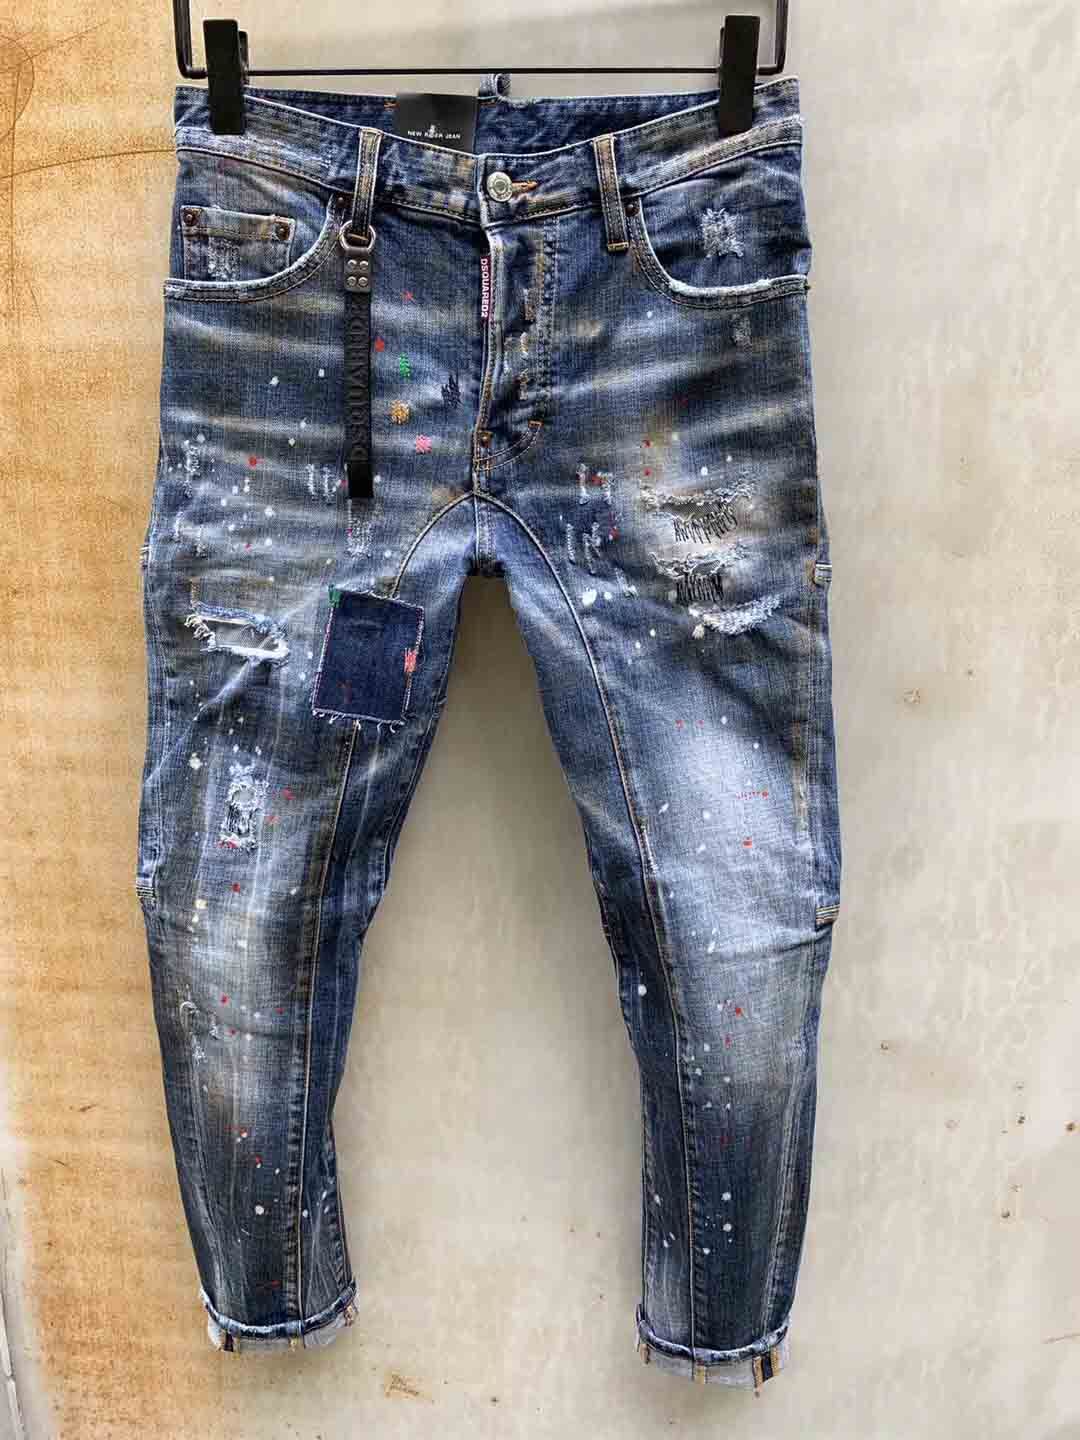 dsquared2 jeans dhgate